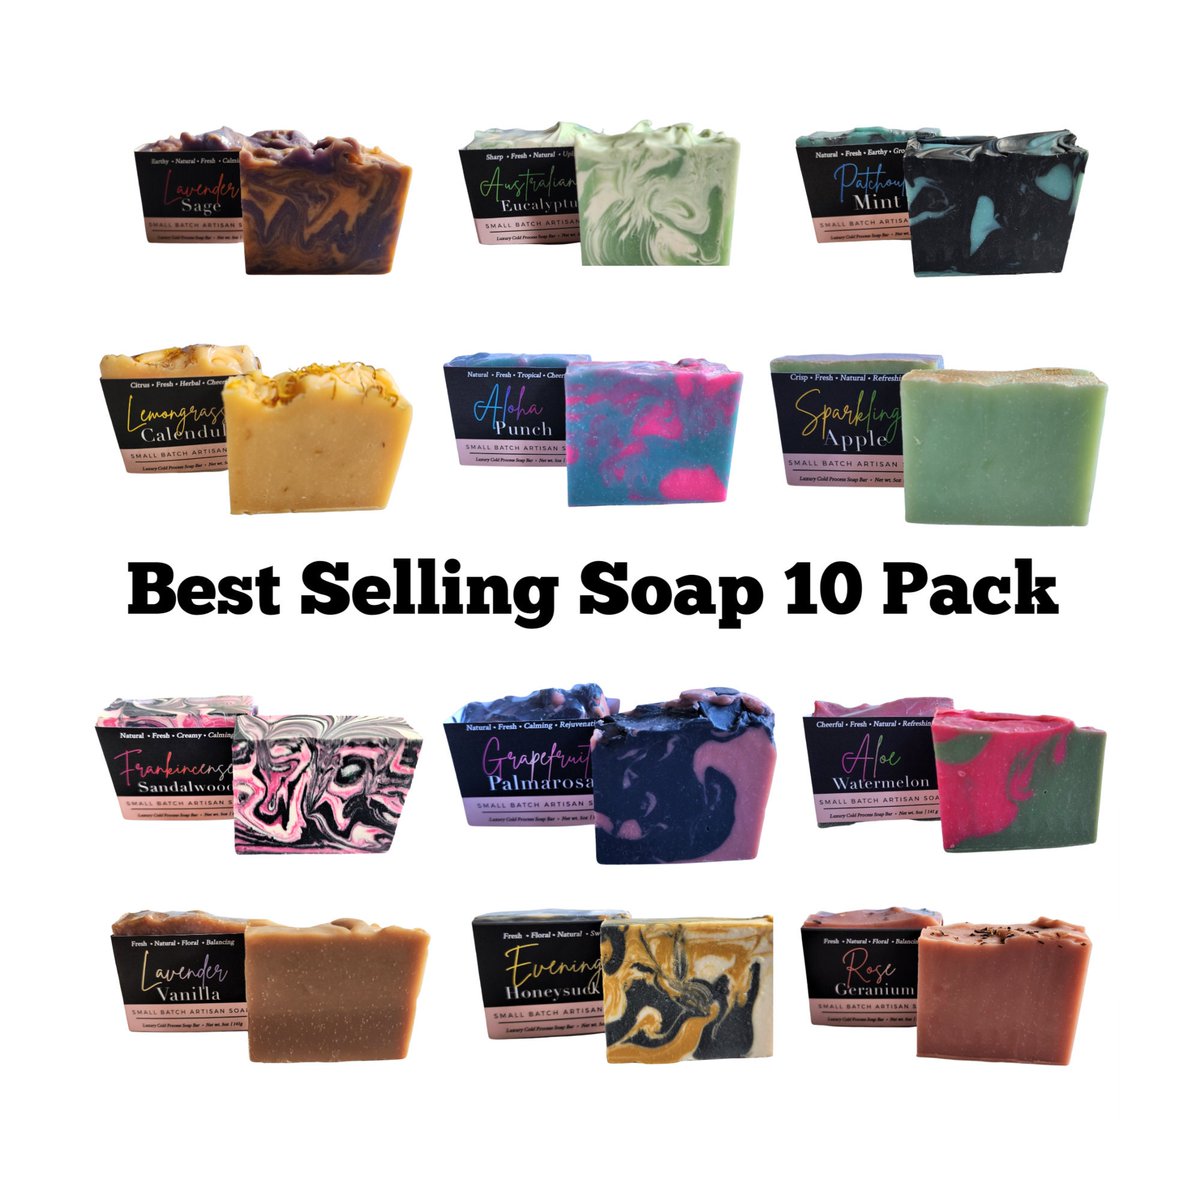 Soap Set Soap Gift Set 10 pack Best Seller Soap Gifts Soap Christmas Gift Natural Soap Organic Soap Gift for her Gift for him Soap Sale tuppu.net/f5a35bd7 #handmadesoap #DeShawnMarie #Etsy #Christmasgifts #selfcare #gifts #shopsmall #Soapgift #NaturalSoap